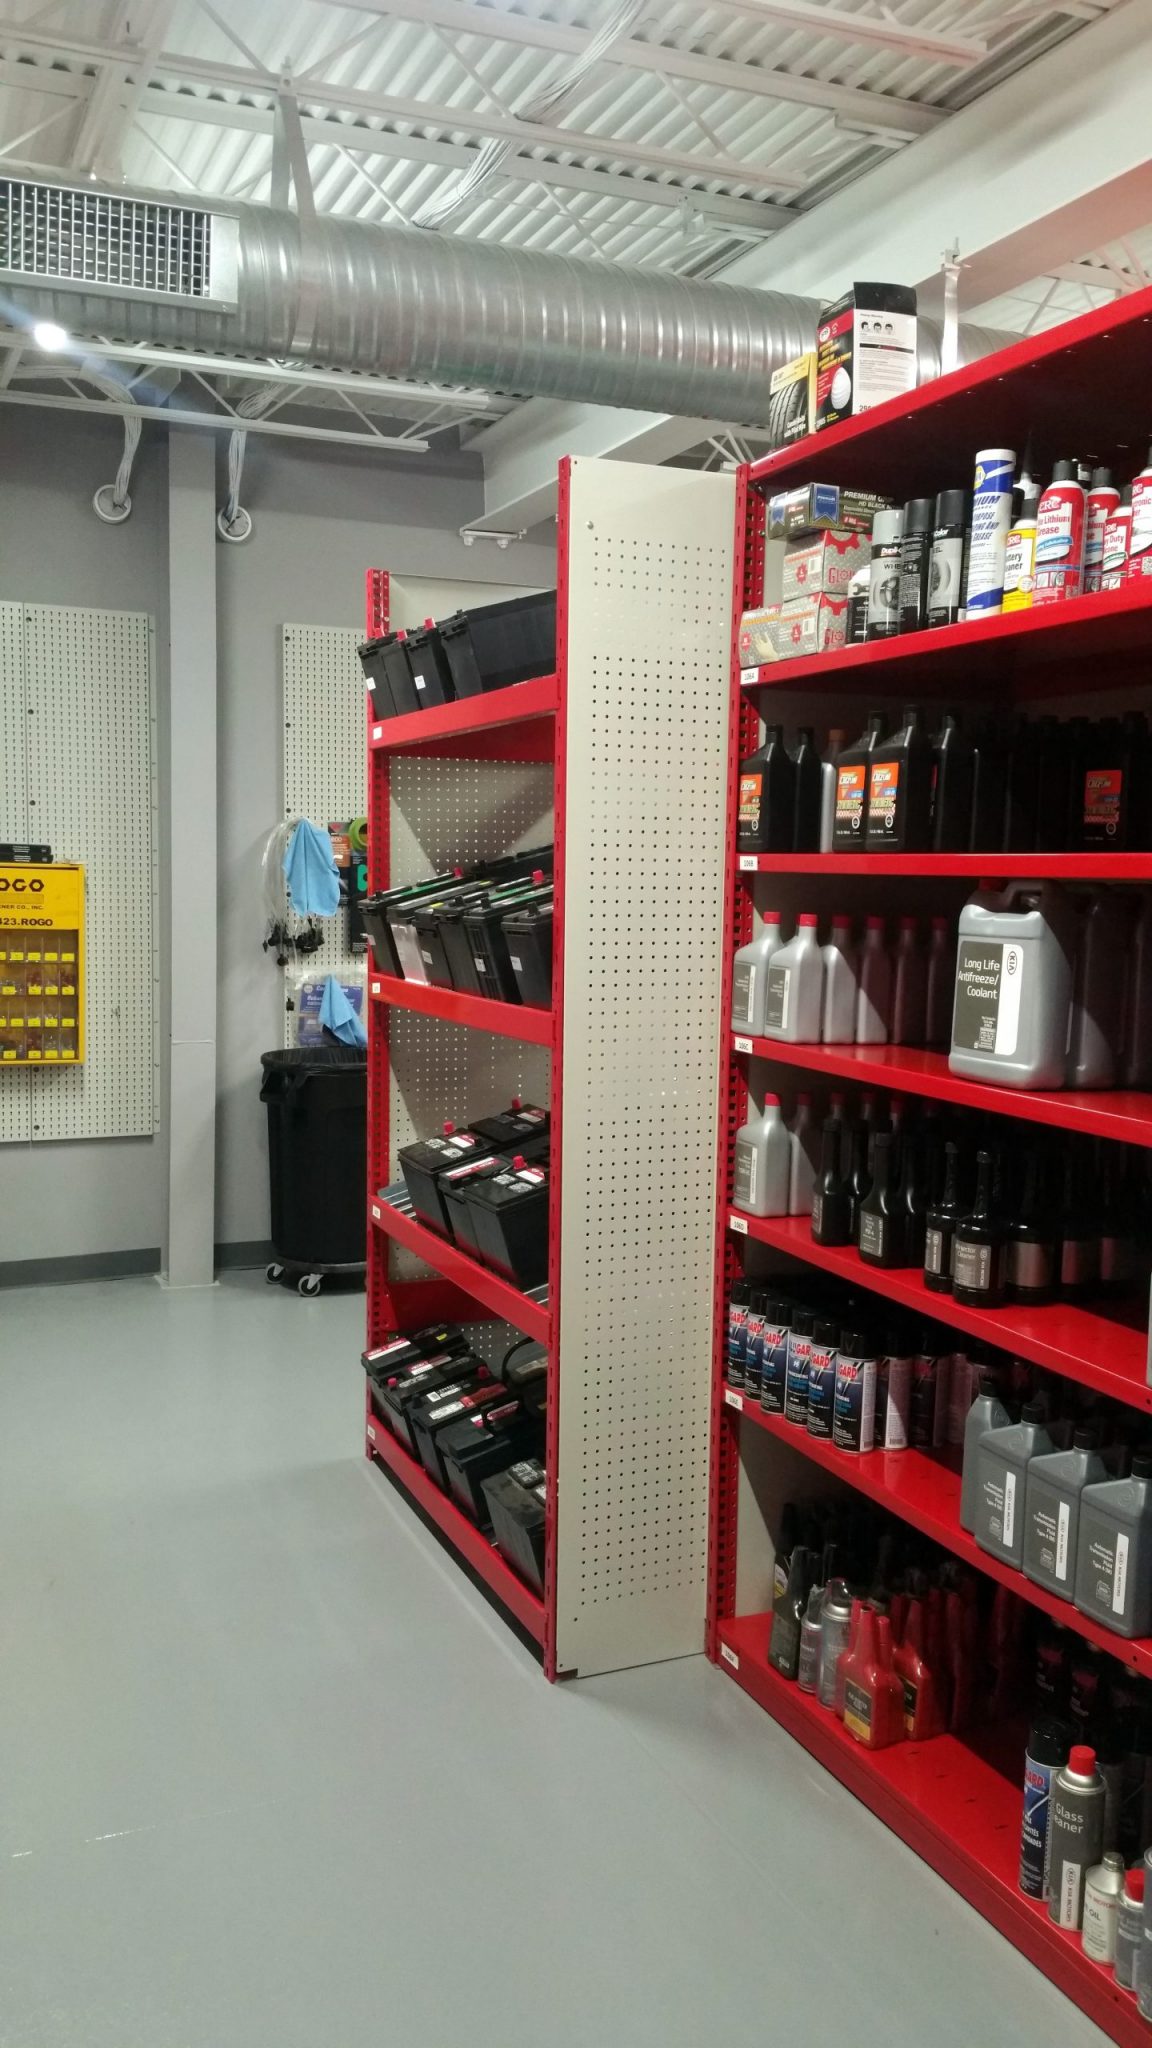 Heavy duty shelves for Batteries and Vehicle Lubricants